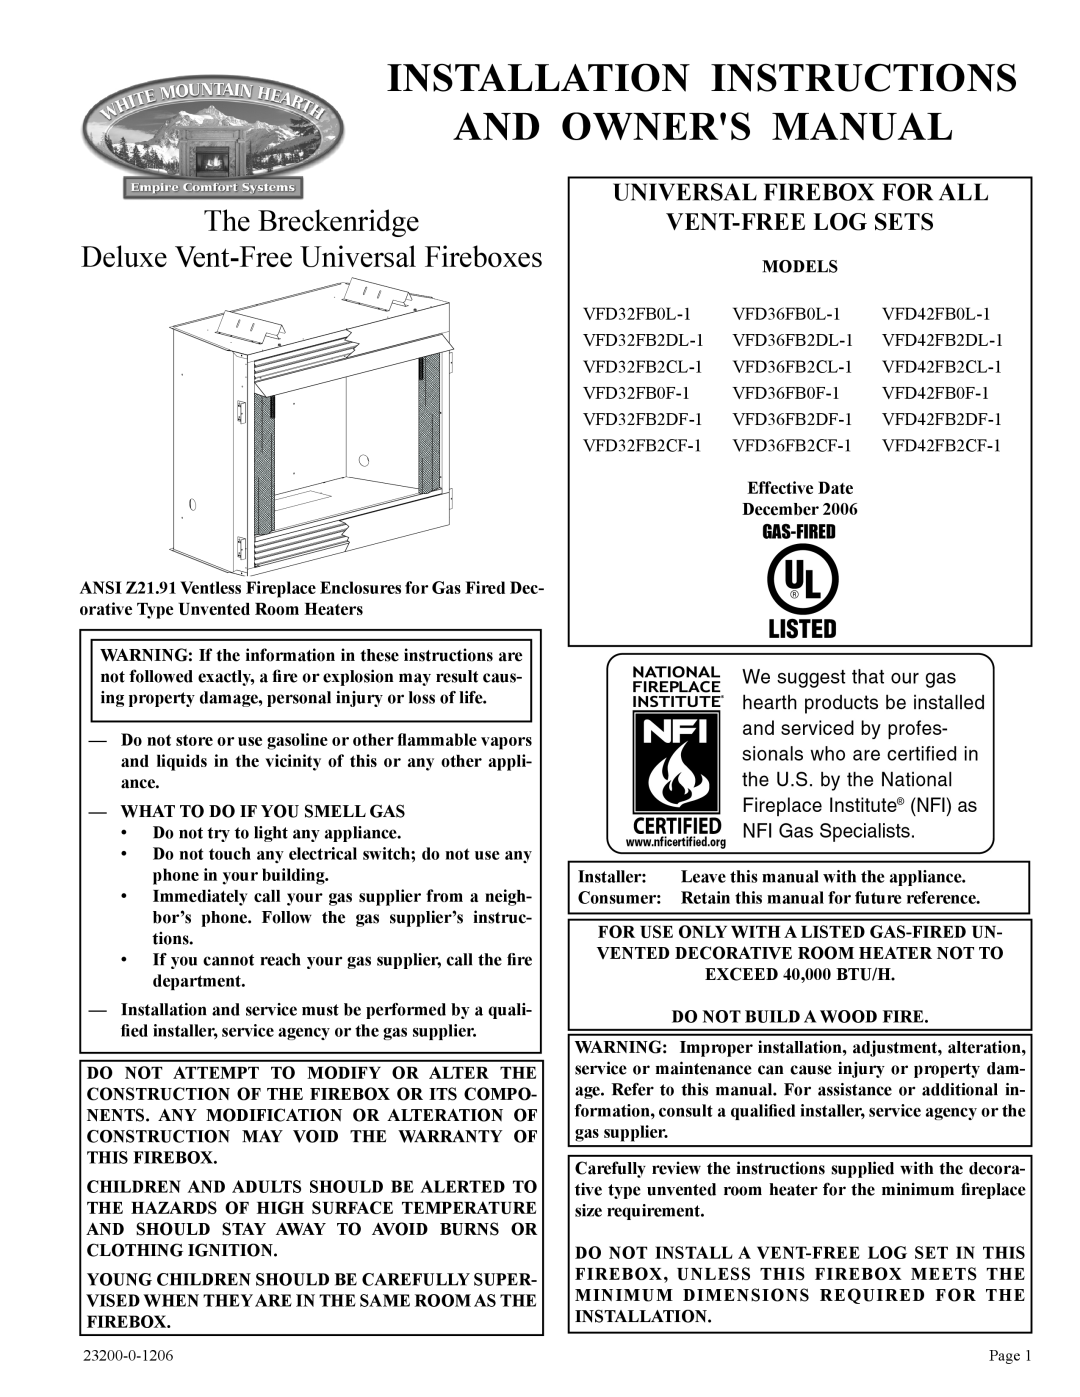 Empire Comfort Systems VFD32FB2CL-1 installation instructions The Breckenridge, Deluxe Vent-FreeUniversal Fireboxes 